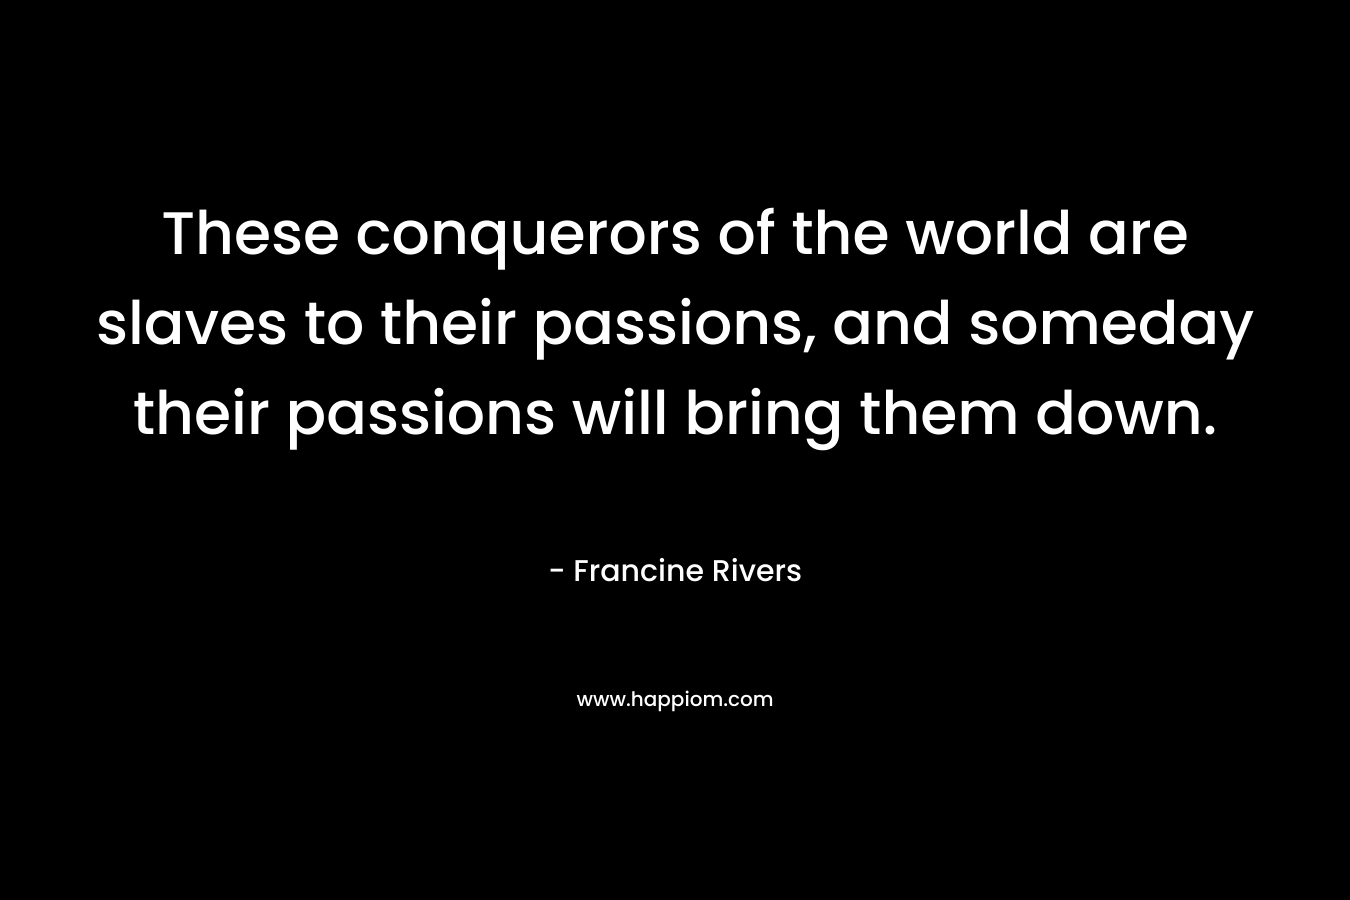 These conquerors of the world are slaves to their passions, and someday their passions will bring them down. – Francine Rivers